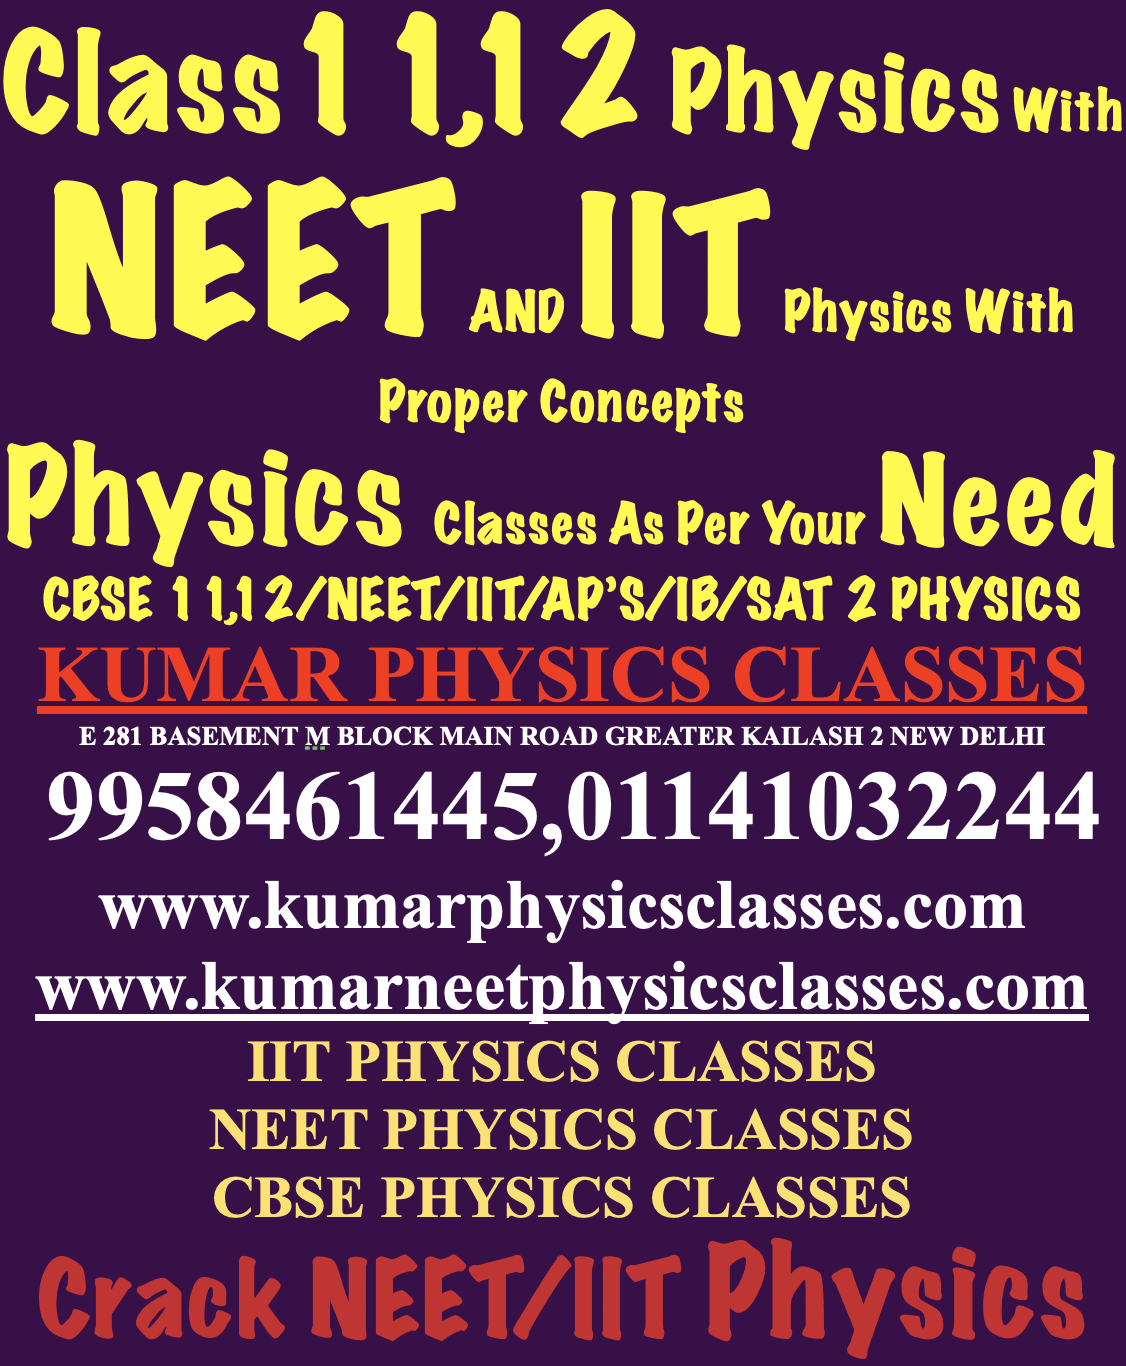 If You Enter In To Class 11,12 and wanted to prepare for IIT NEET With Cbse Physics Then Start Preparing Your Physics Concepts In Day One And Crack IIT NEET Physics With Cbse ,Classes As Per Your Need